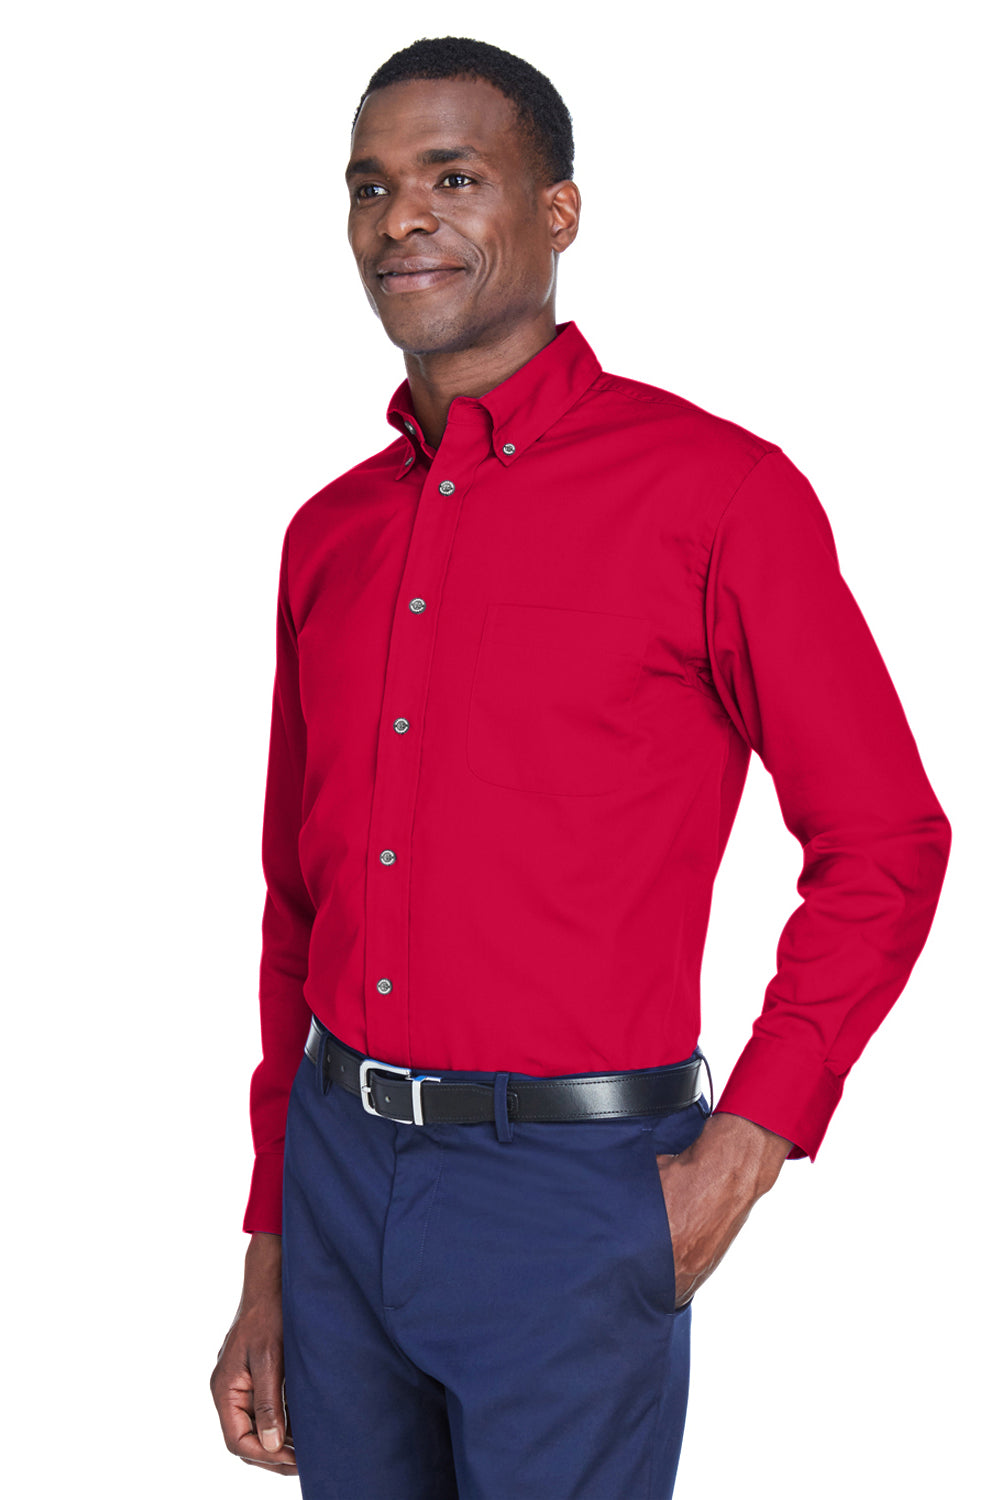 Harriton M500/M500T Wrinkle Resistant Long Sleeve Button Down Shirt w/ Pocket Red 3Q